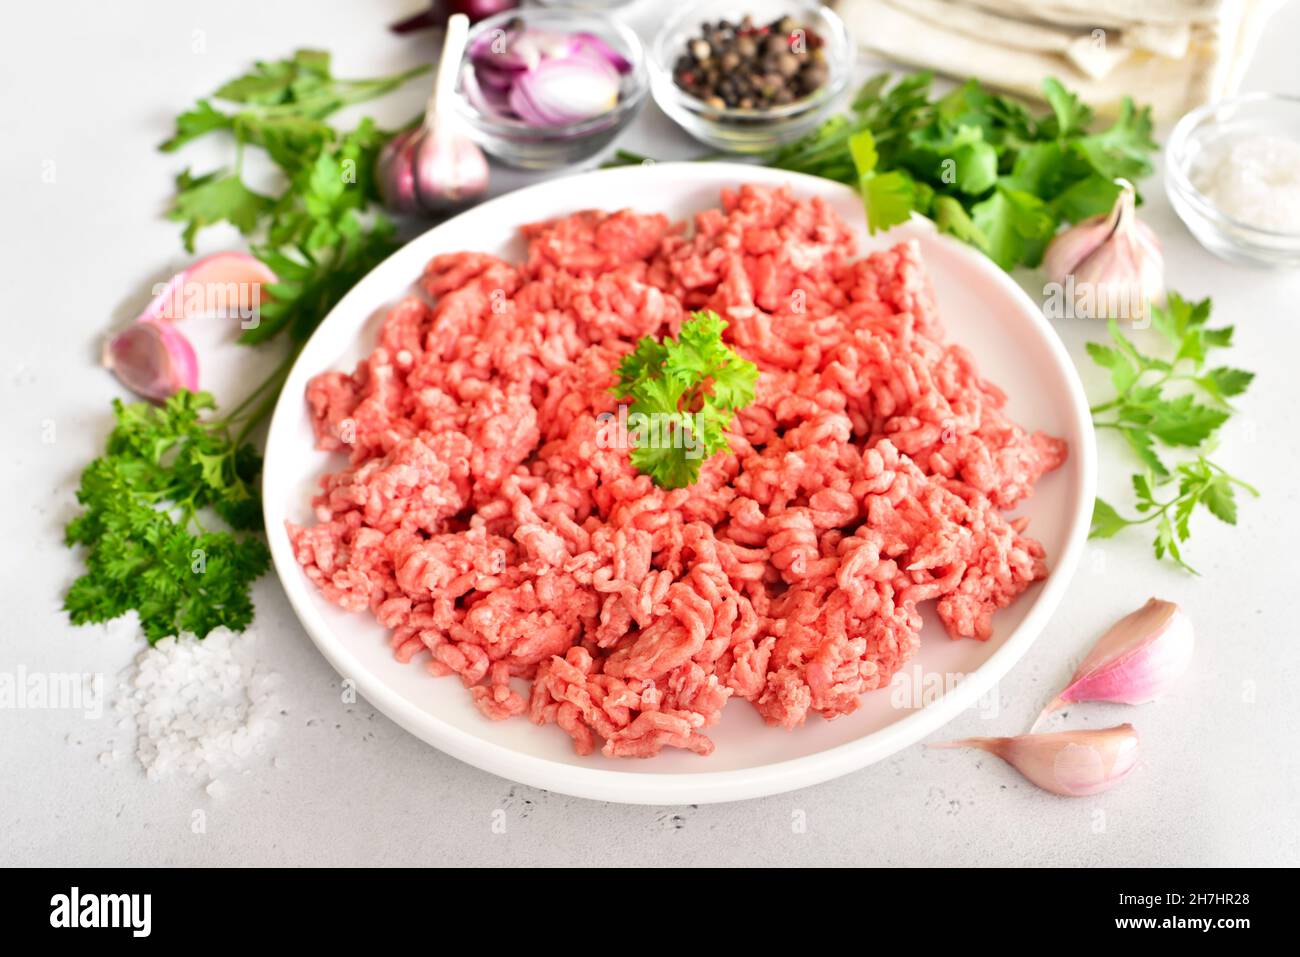 Raw beef minced meat on plate Stock Photo